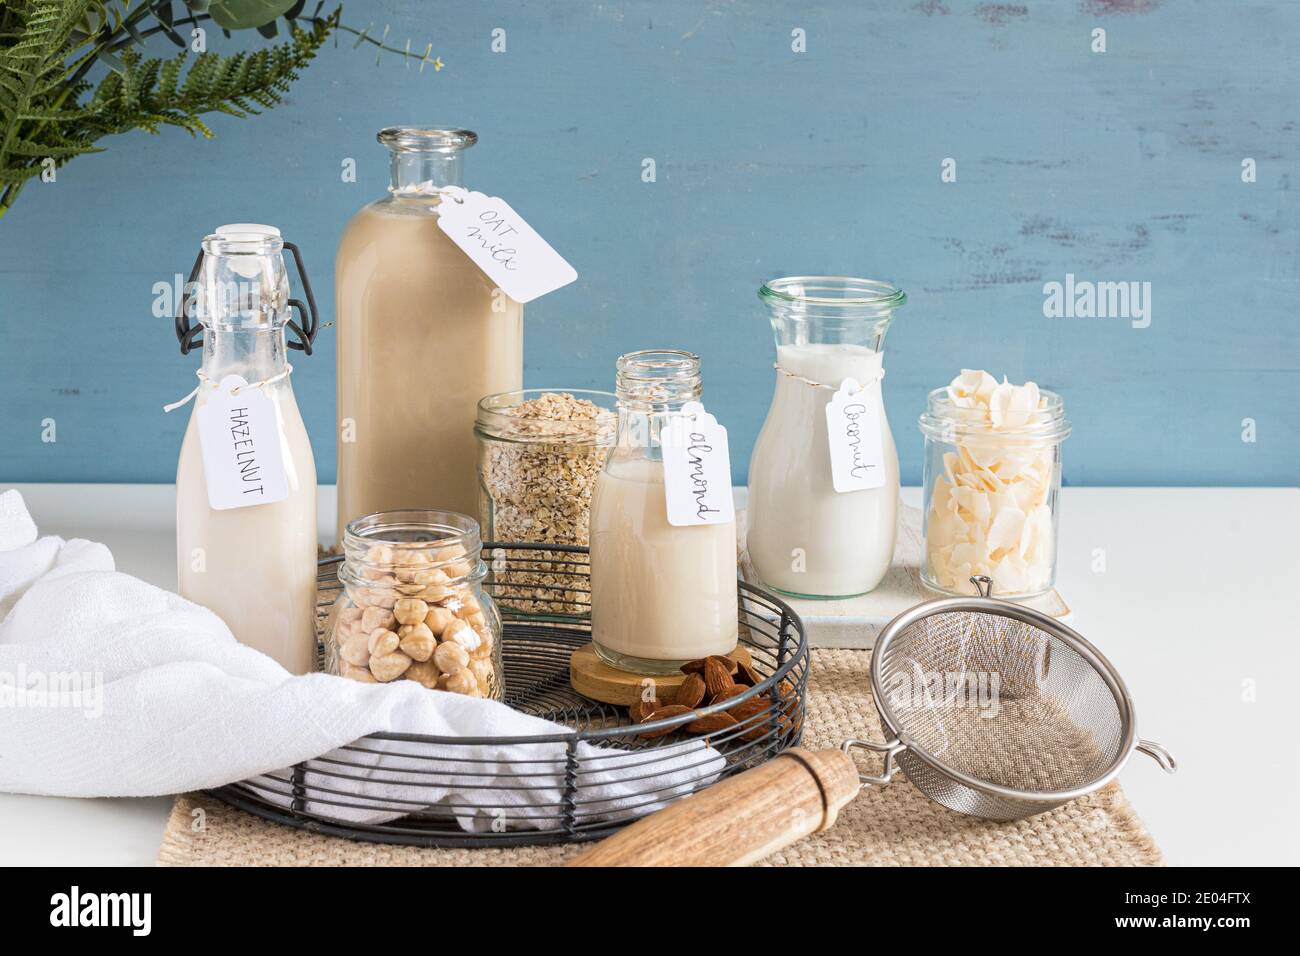 Bottles of alternative tagged milks in on a rustic tablecloth. Crystal jars full of seeds ,cereal and nuts are next to them. Stock Photo